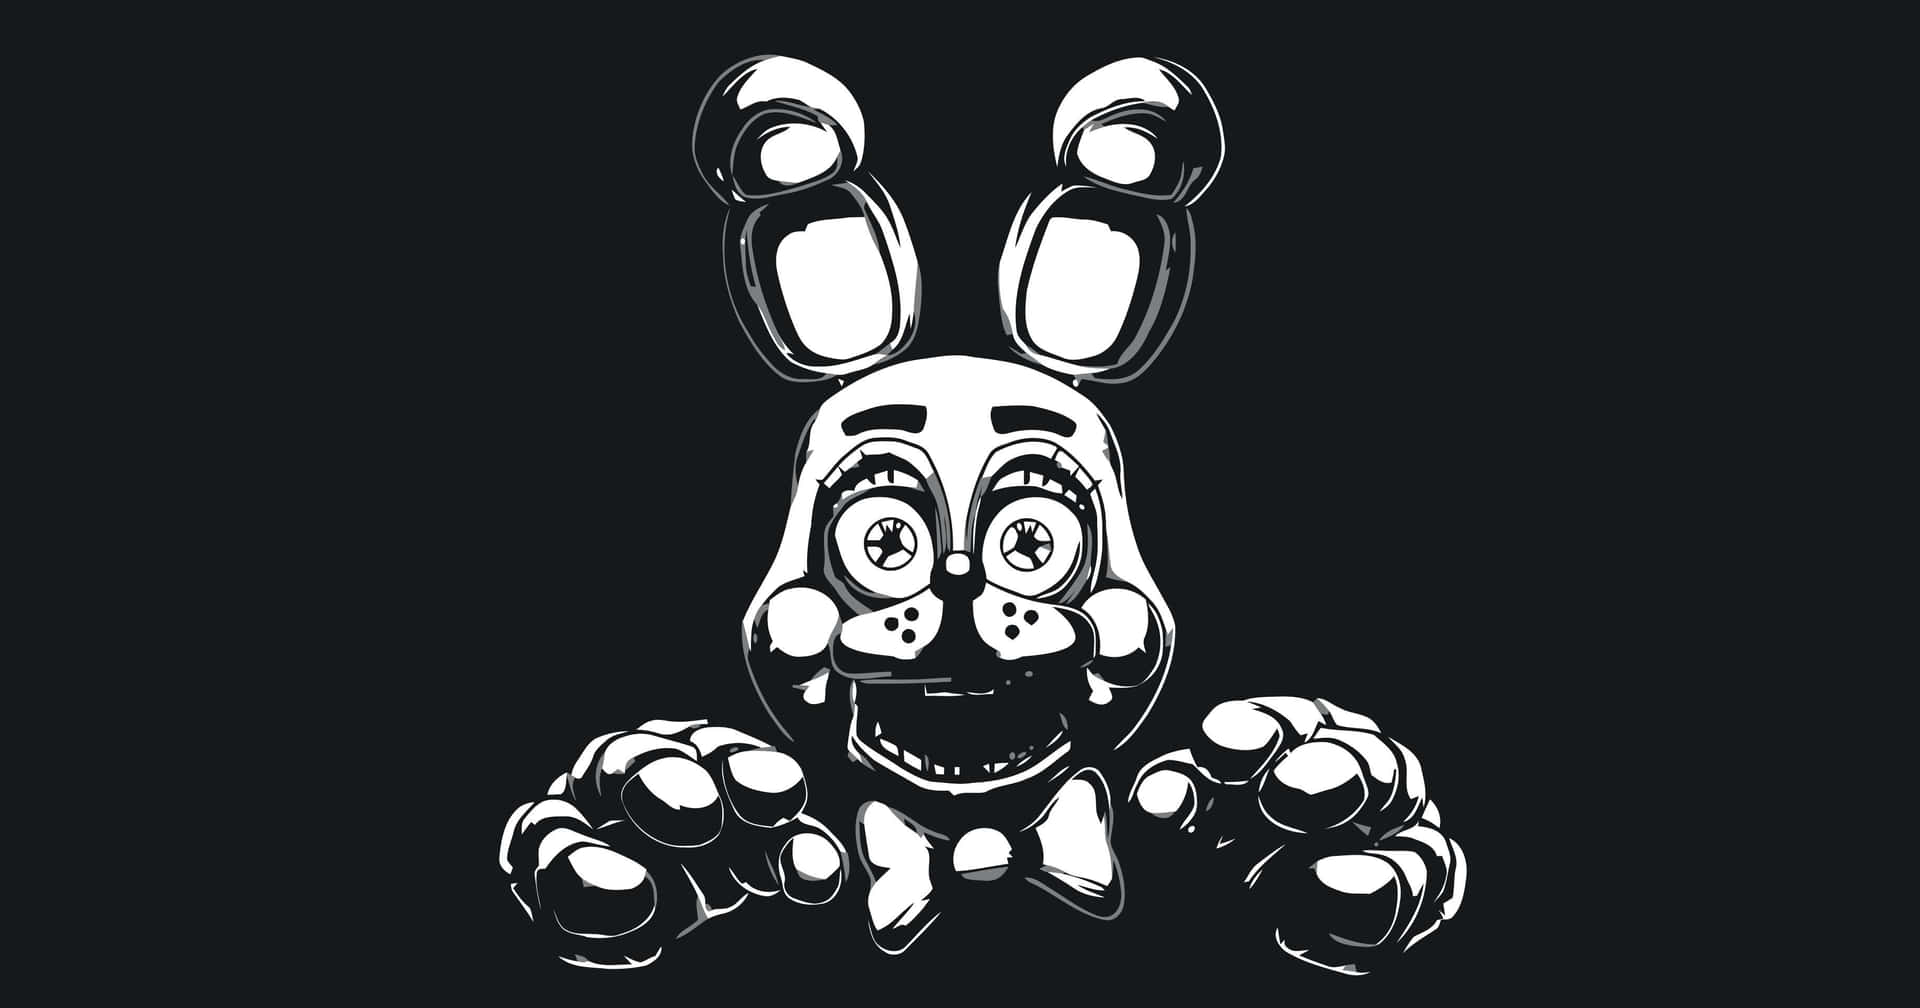 Step into the world of Five Nights at Freddy's